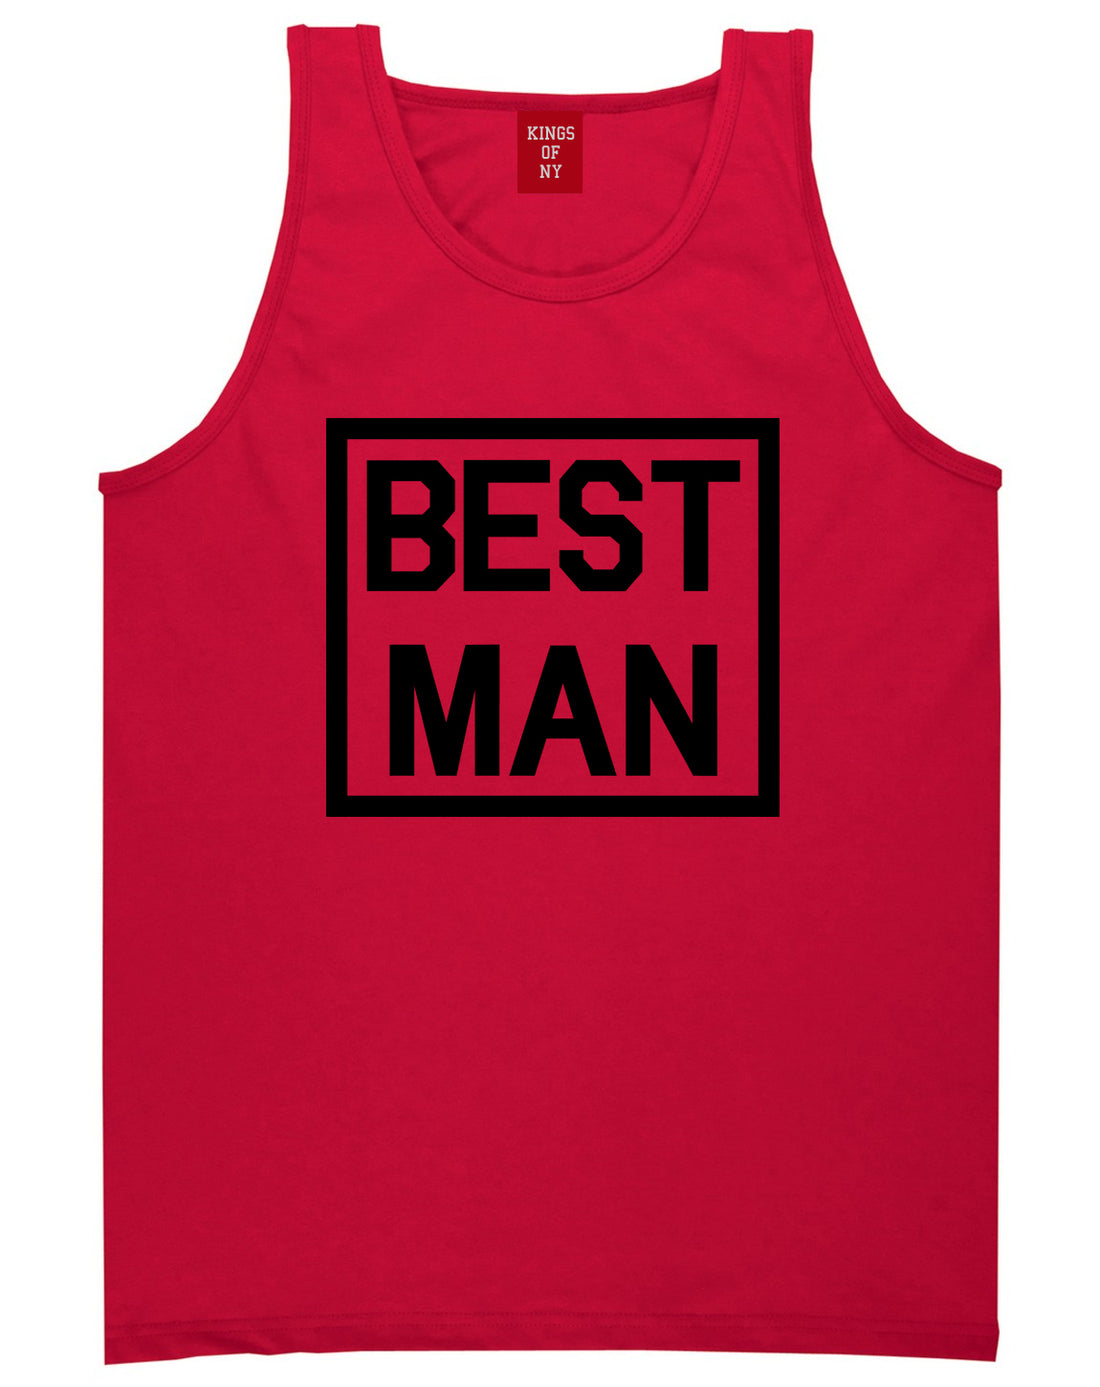 Best Man Bachelor Party Red Tank Top Shirt by Kings Of NY